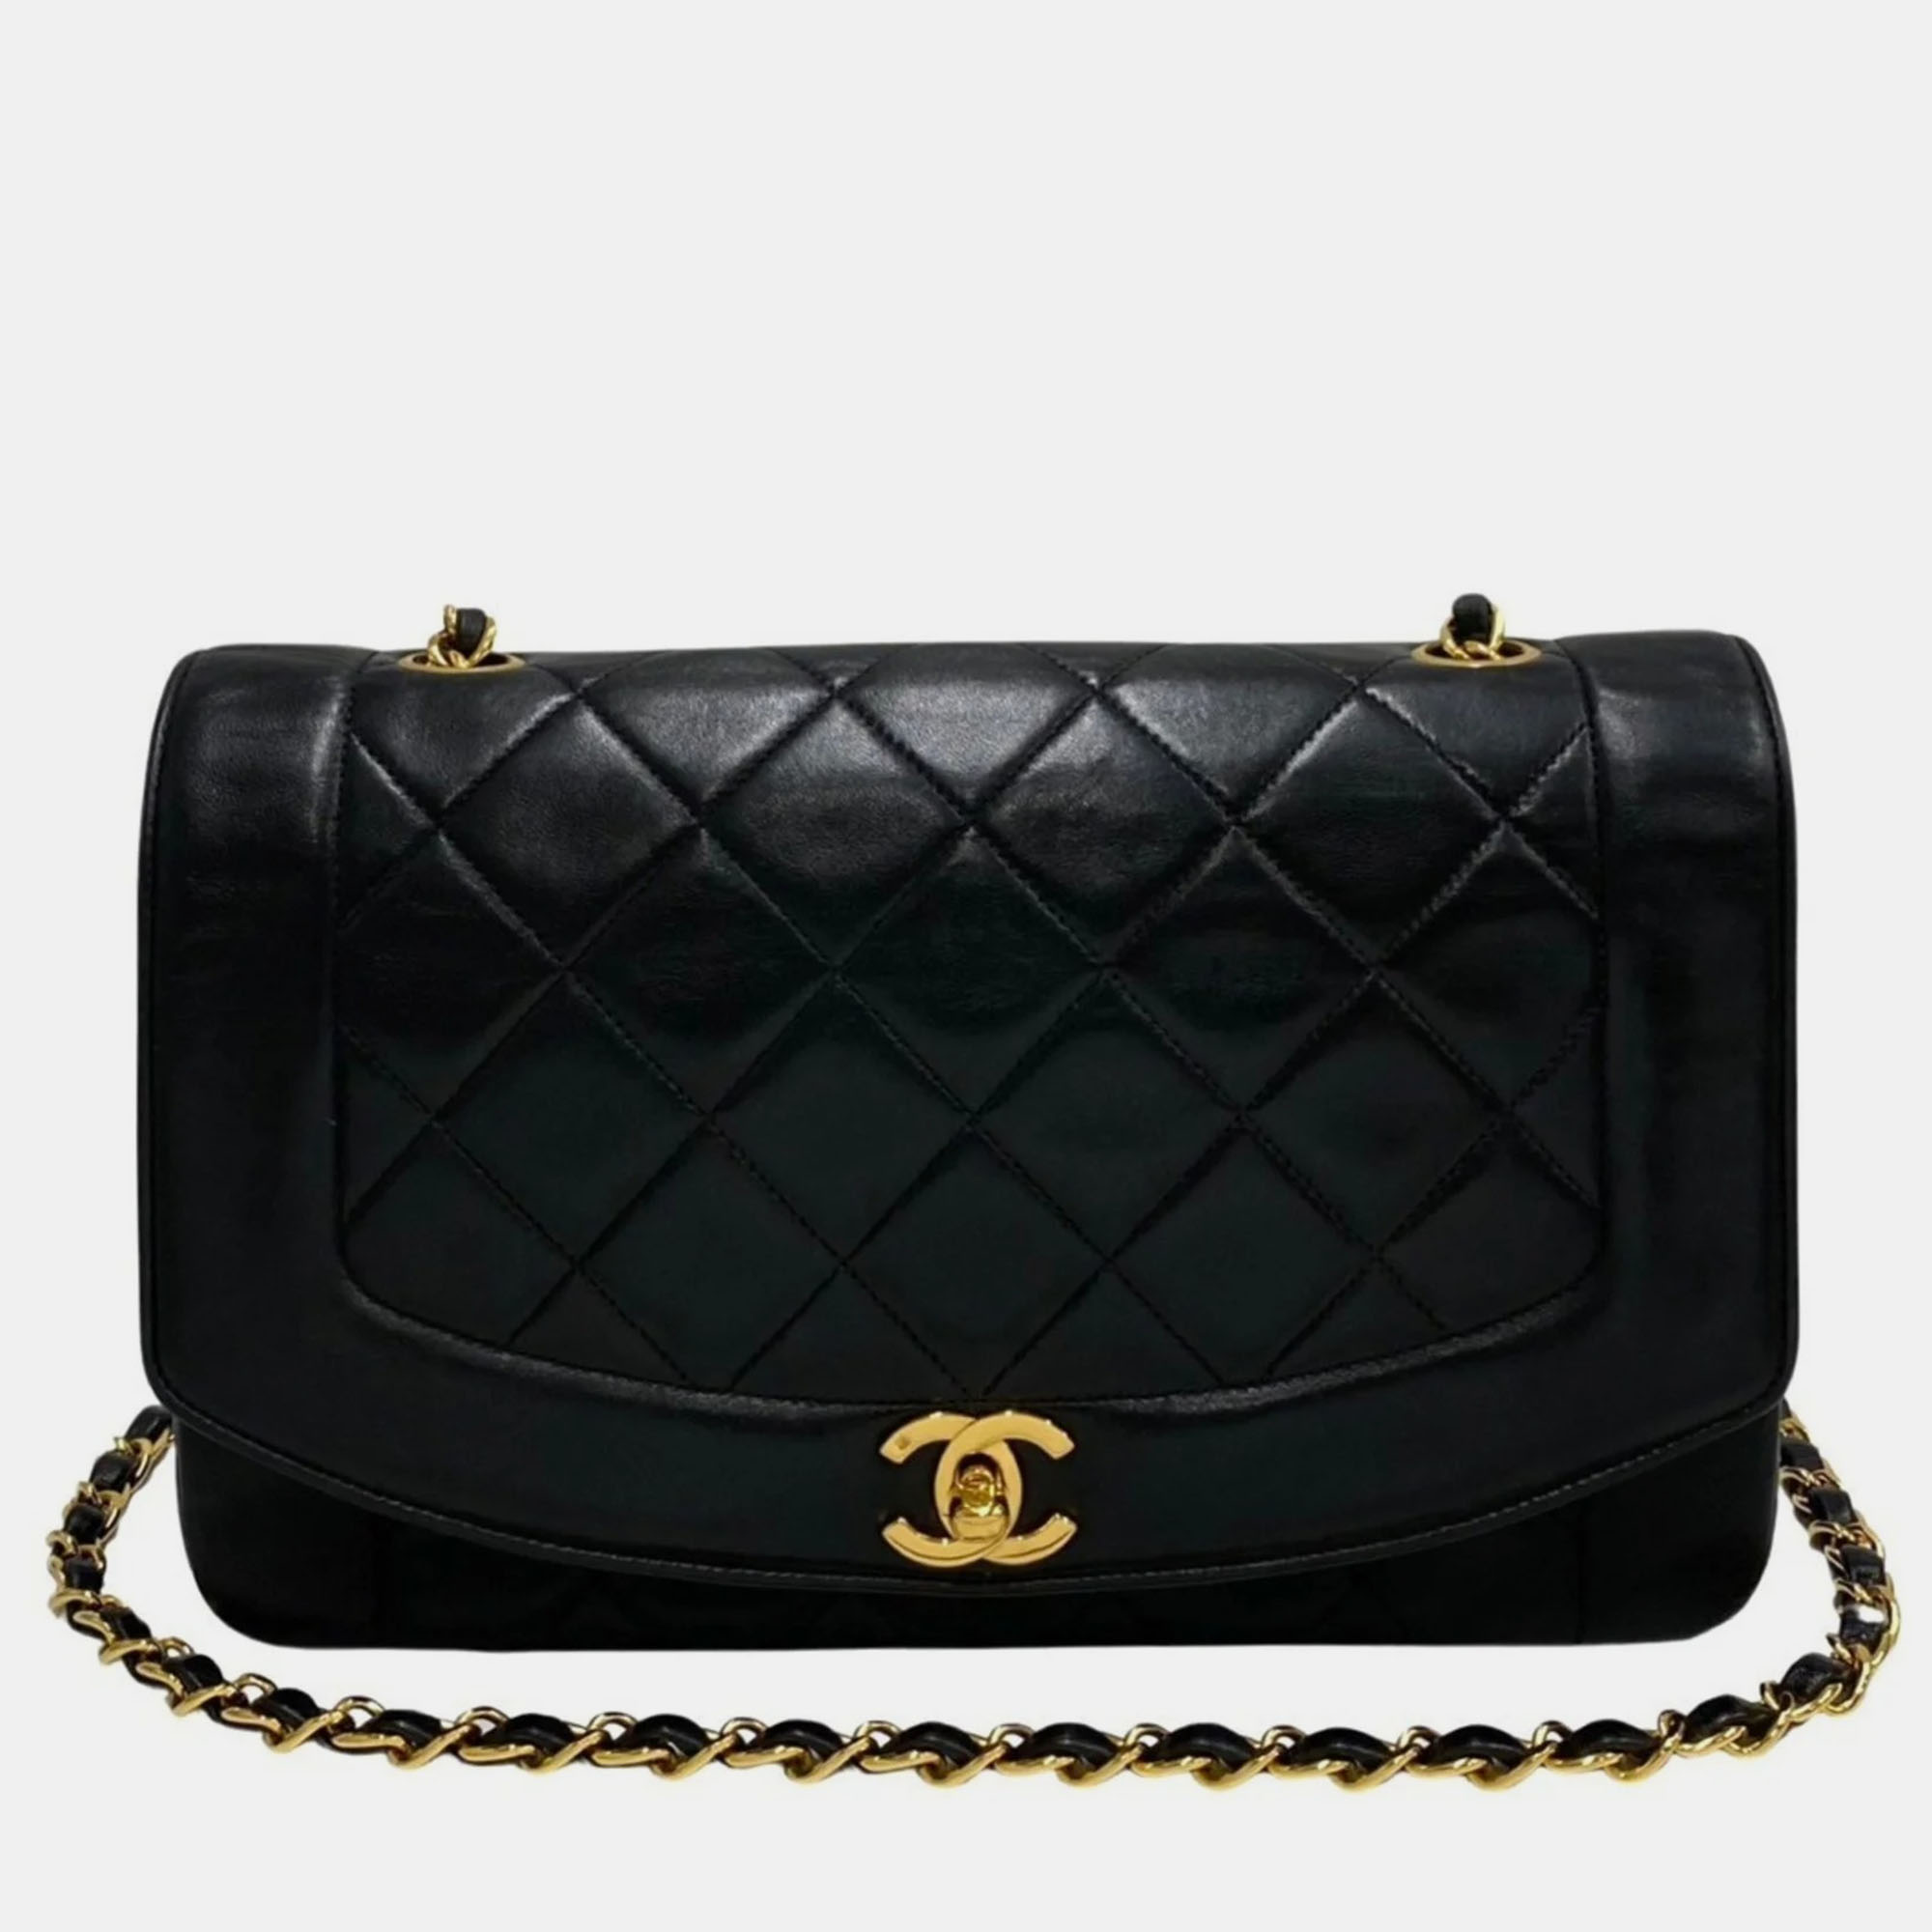 Chanel small vintage diana flap bag